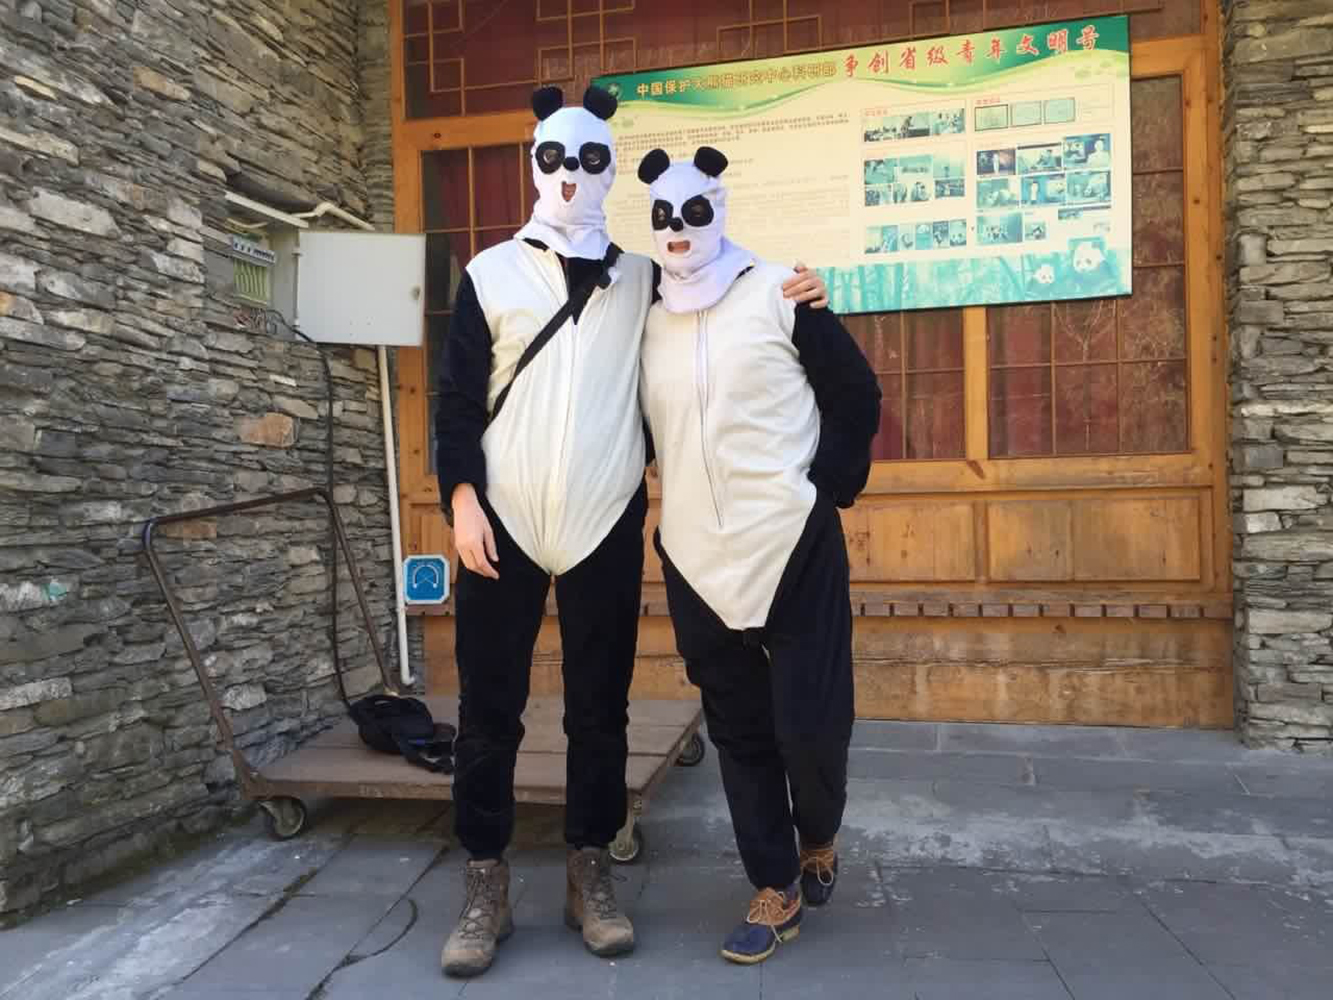 Photographer Adam Dean and TIME correspondent Hannah Beech wearing panda costumes while they report on the pandas at the Hetaoping Research and Conservation Center for the Giant Panda in Wolong, National Nature Reserve Sichuan Province, China, Dec 1, 2015.